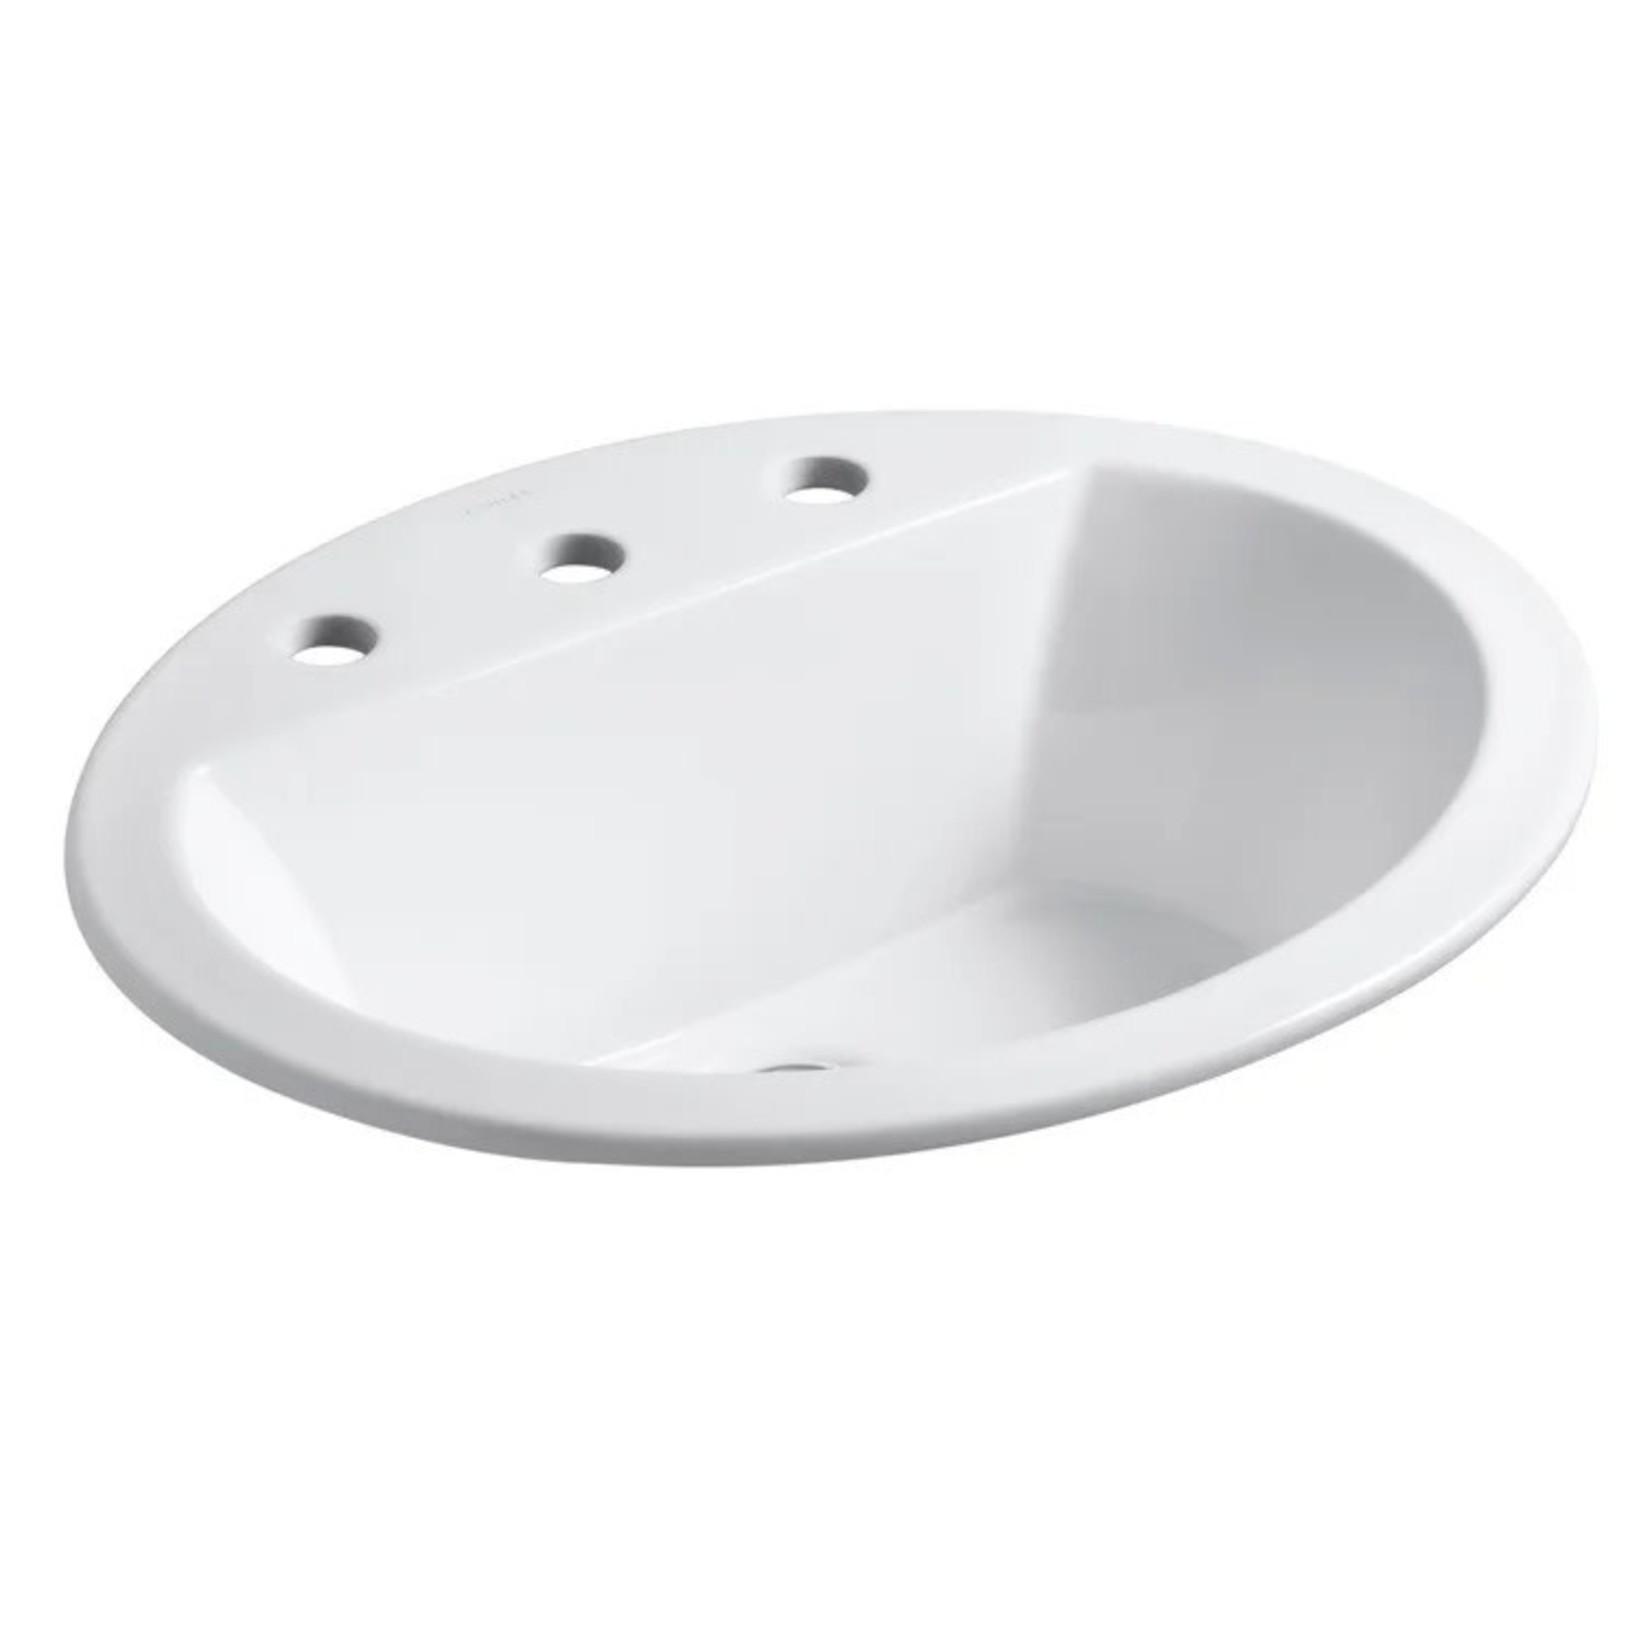 *8" Centers Bryant Ceramic Oval Drop-In Bathroom Sink with Overflow - White